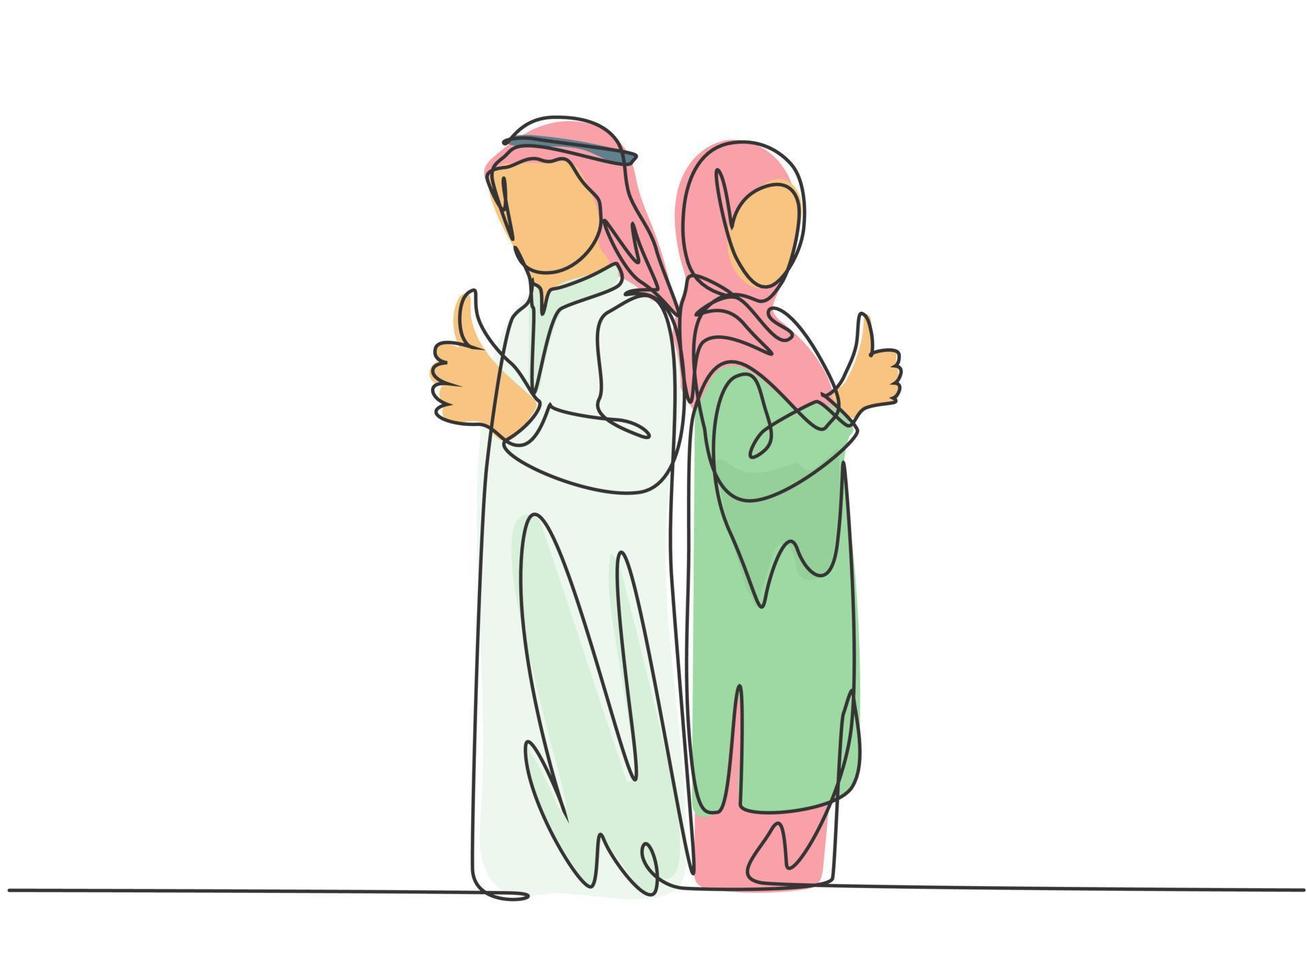 One single line drawing of young happy muslim male and female couple give thumb up gesture. Saudi Arabia cloth shmag, kandora, headscarf, thobe, ghutra. Continuous line draw design vector illustration